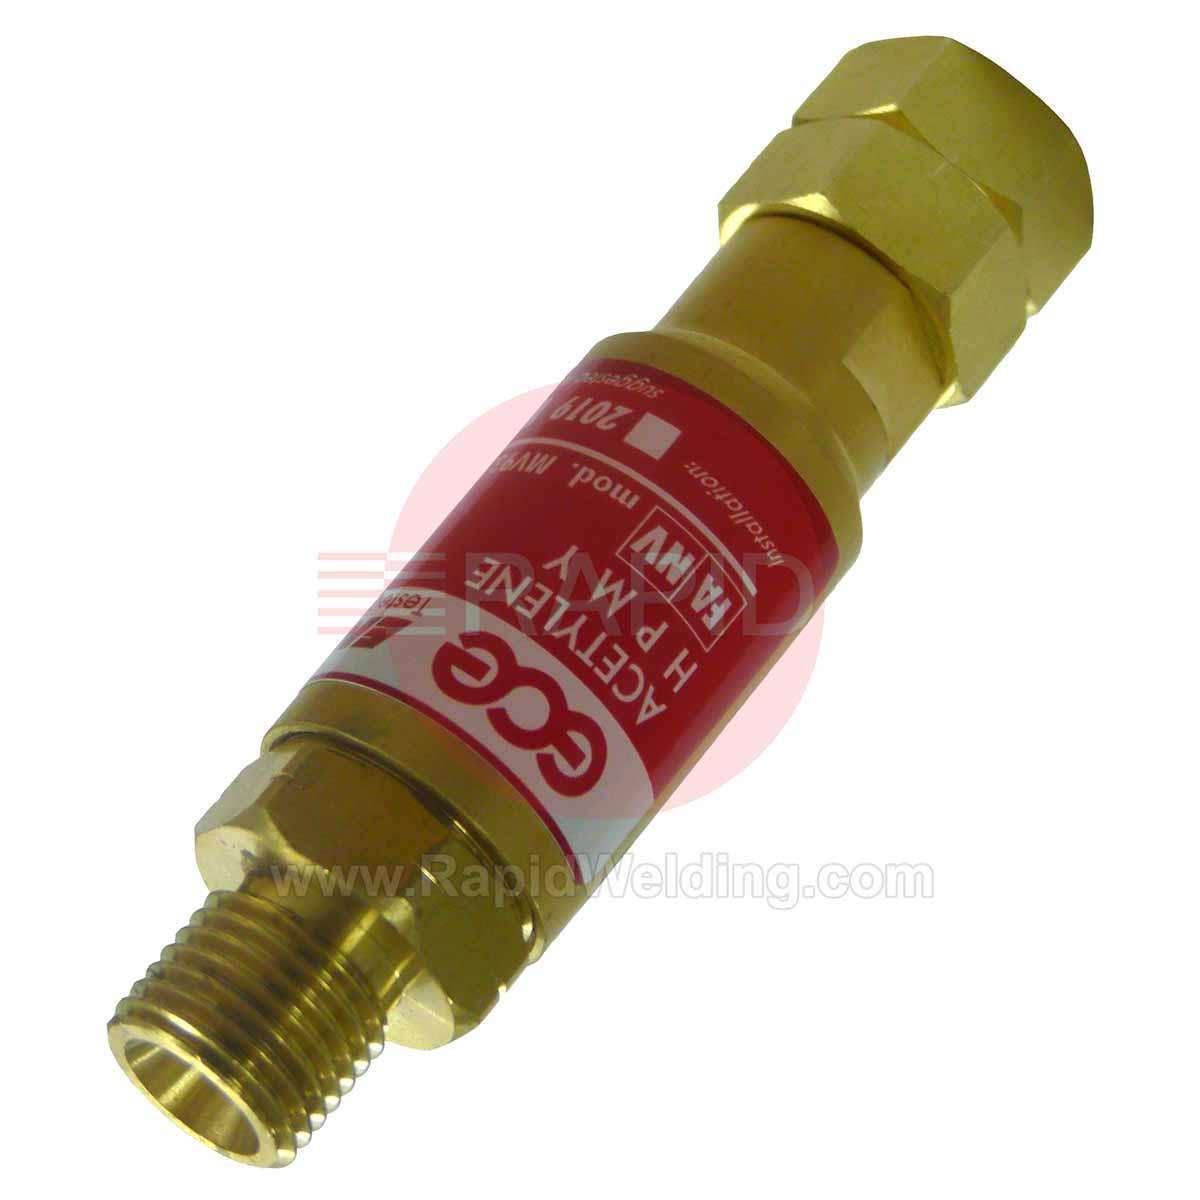 H1295  Fuel Gas Torch Mounted Flash Arrestor 1/4 BSP L/H Connection.